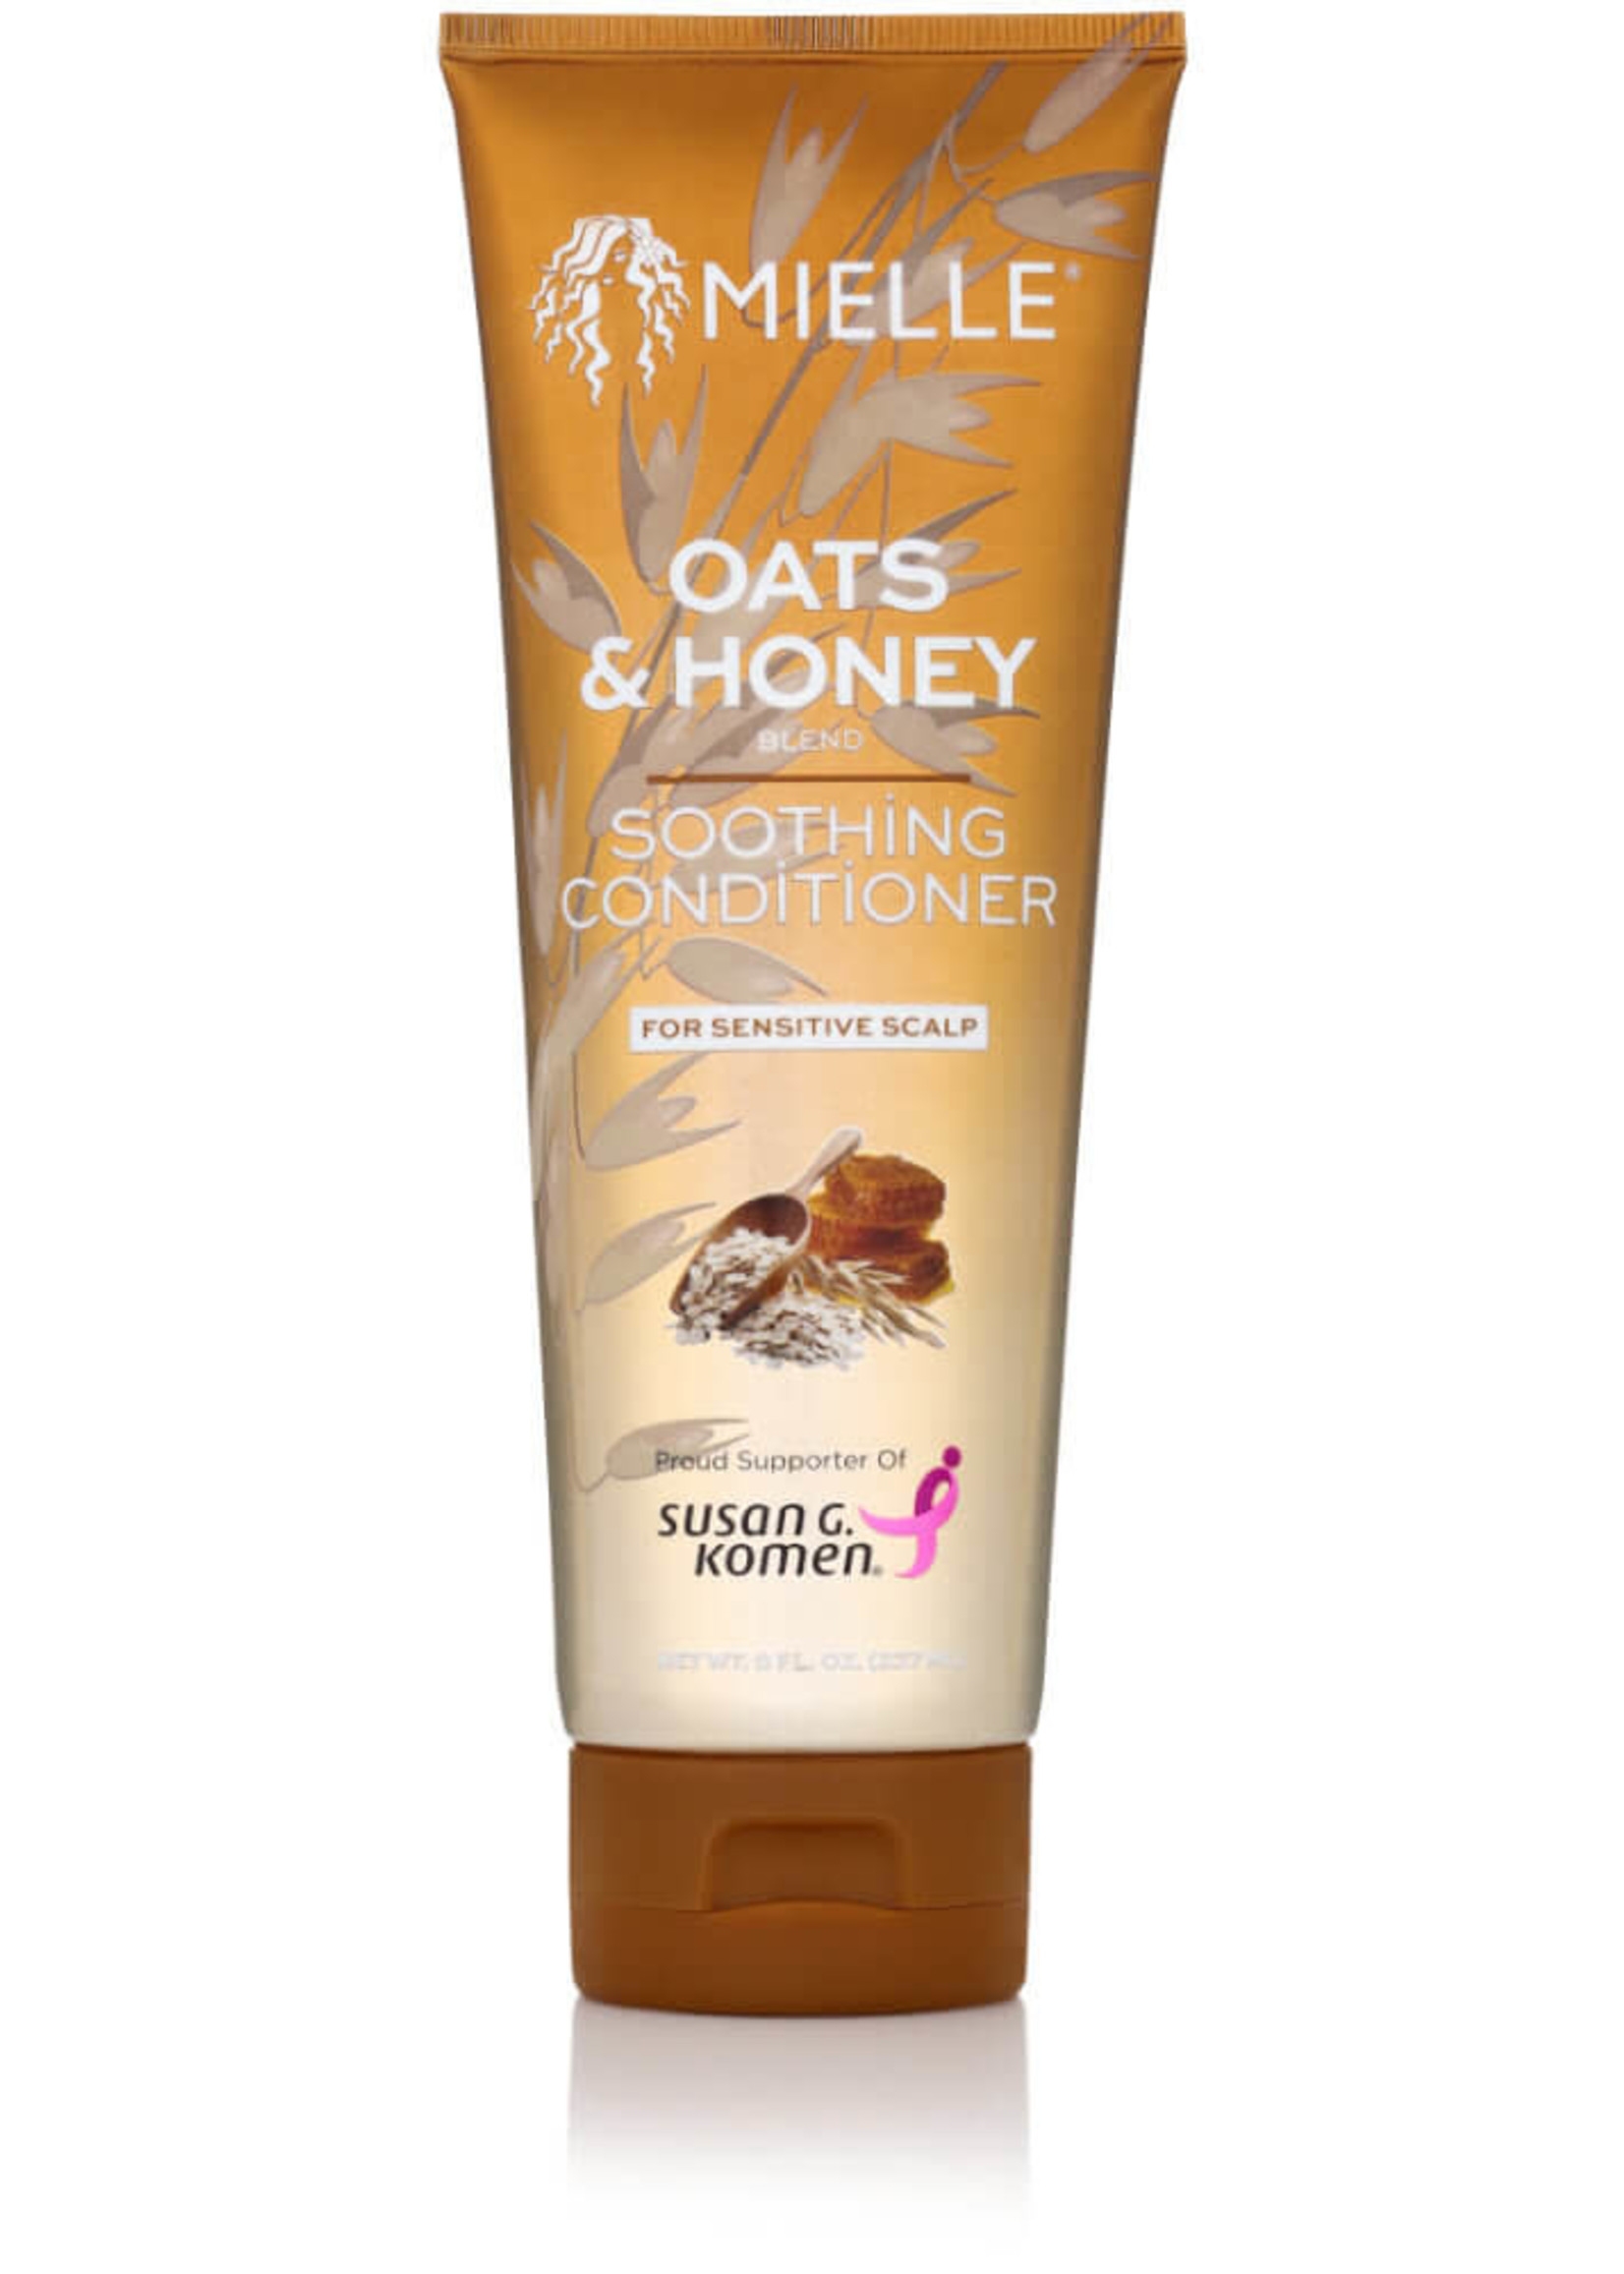 Mielle Organics Oats & Honey Soothing Conditioner